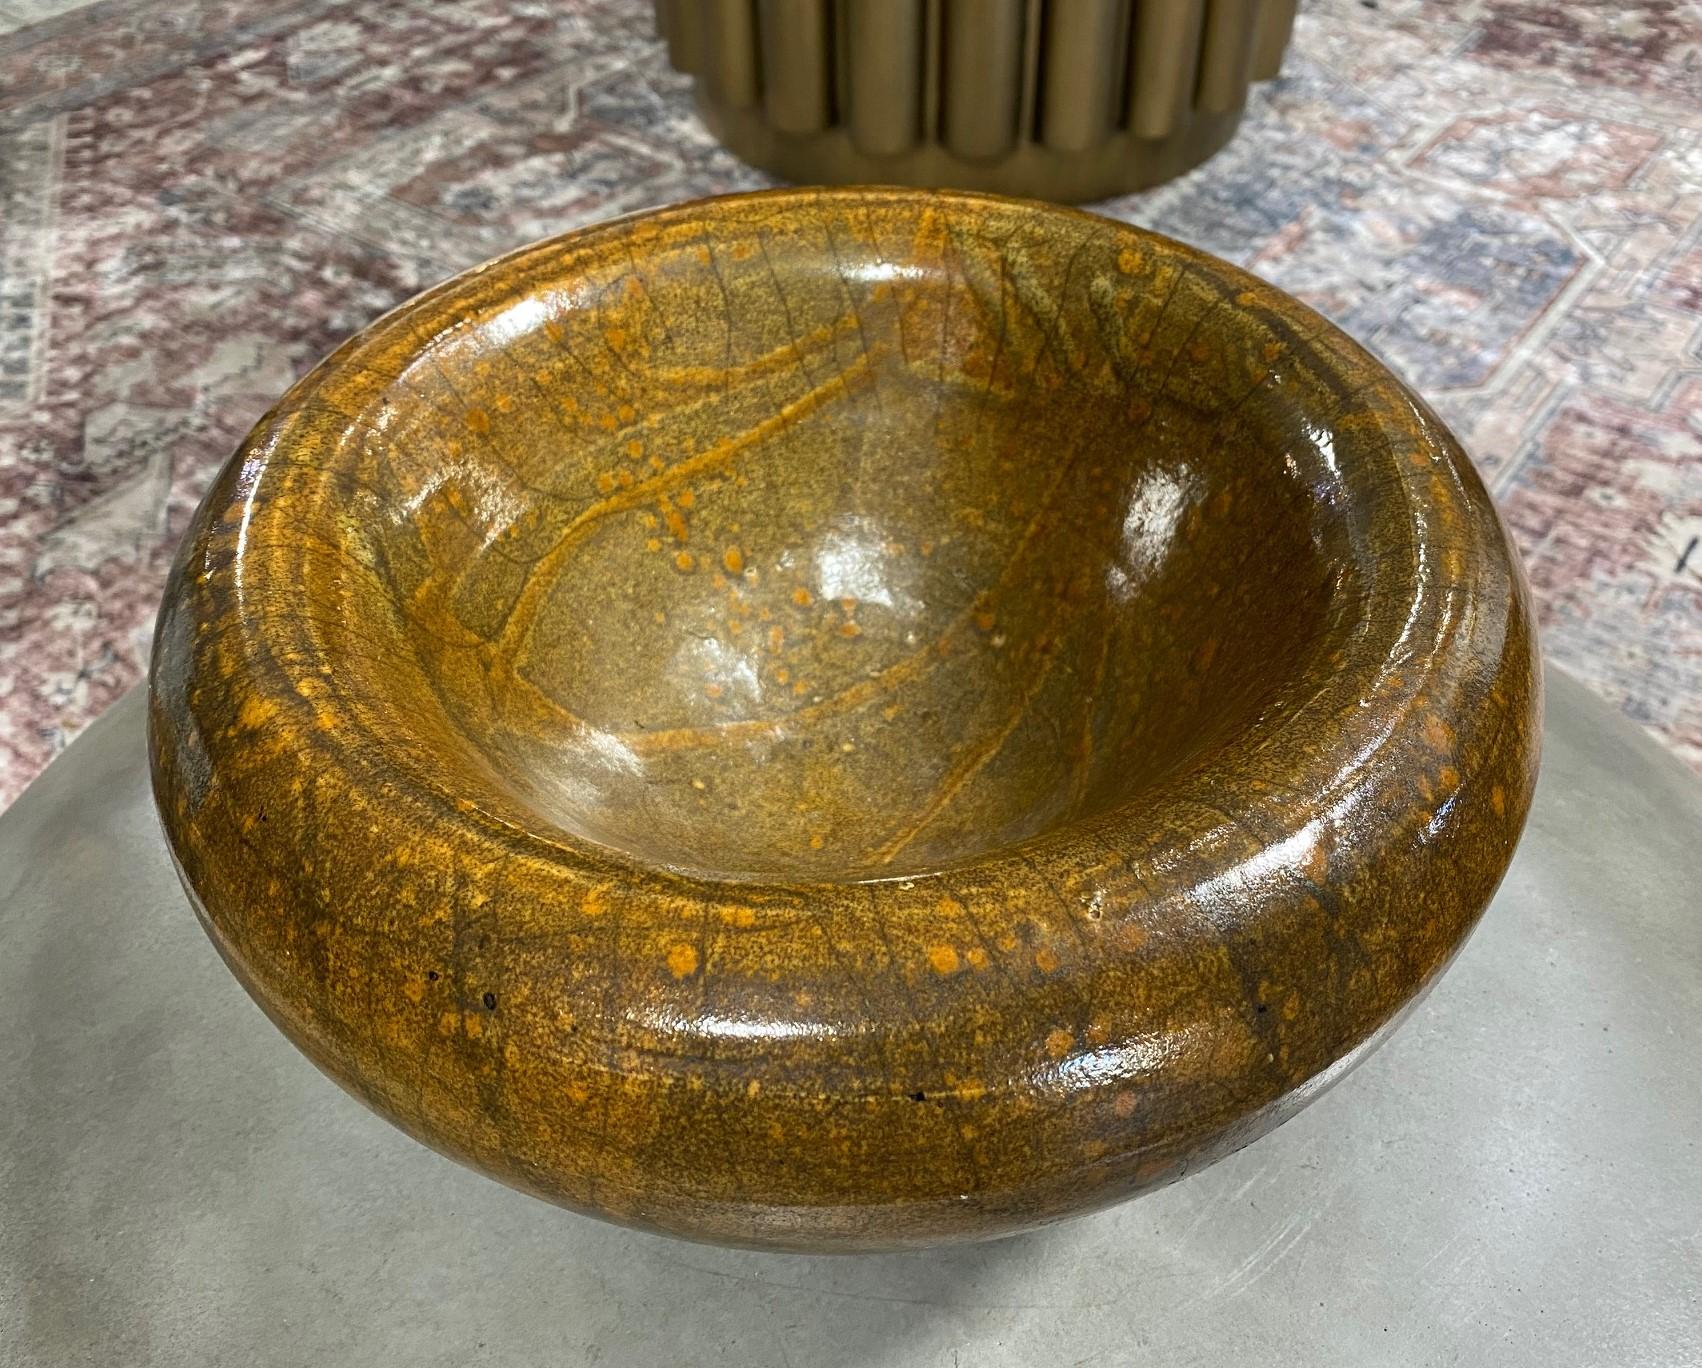 A wonderful and gorgeously designed and glazed bowl by Hawain potter/artist Ed K Higa (initially we thought this bowl was by Charles Higa, also a Hawaiin artist but now believe it is Ed Higa's work). 

The raku-fired bowl has a Wabi-Sabi feel and